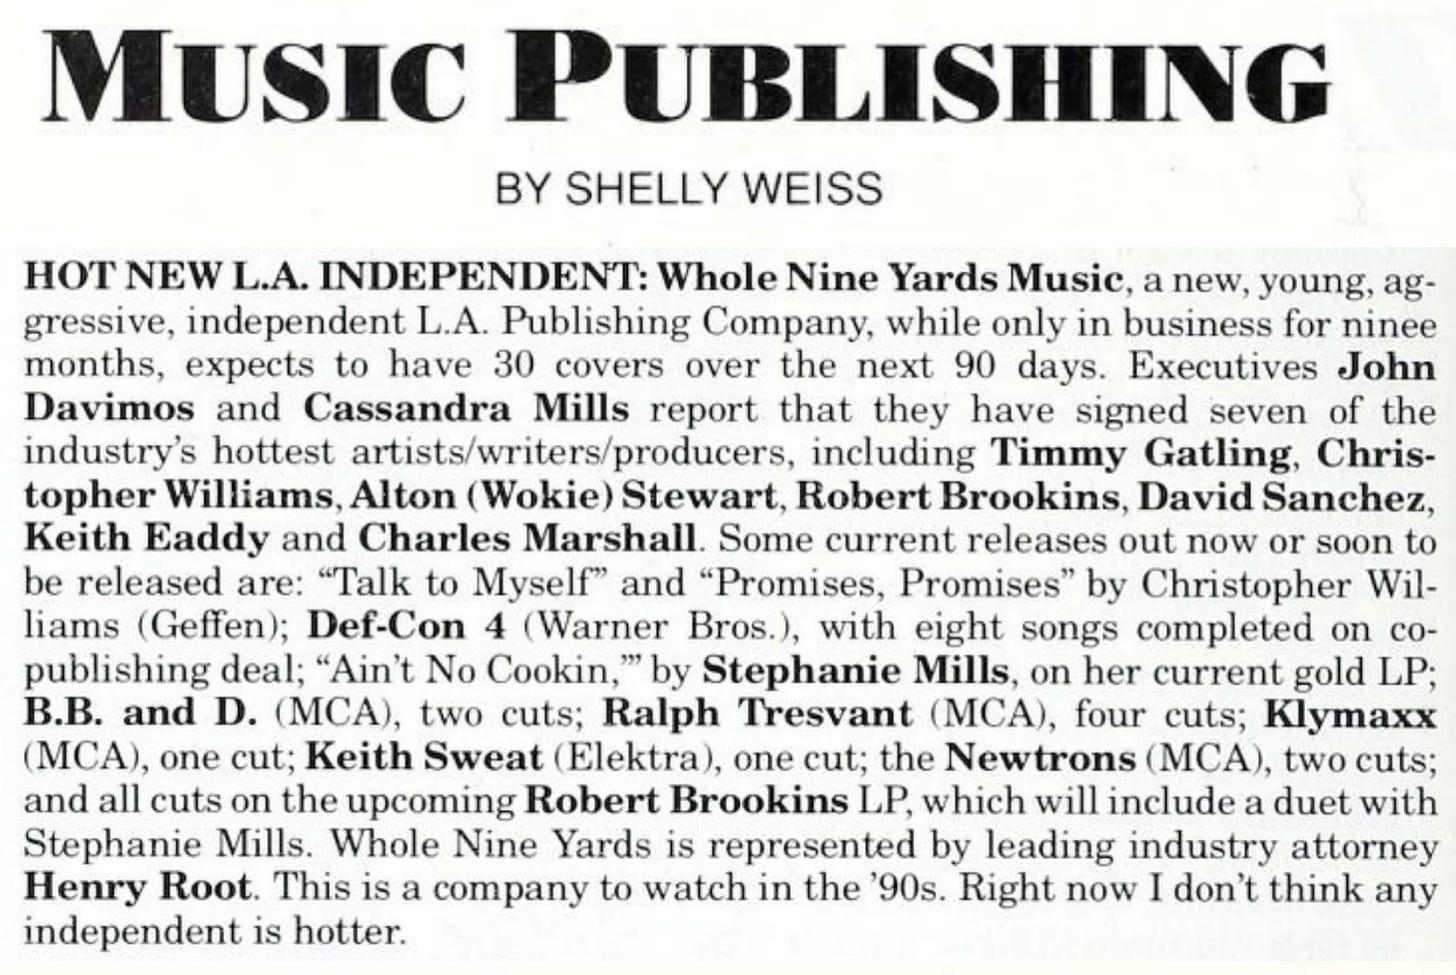 HOT NEW L.A. INDEPENDENT: Whole Nine Yards Music, a new, young, aggressive, independent L.A. Publishing Company, while only in business for ninee months, expects to have 30 covers over the next 90 days. Executives John Davimos and Cassandra Mills report that they have signed seven of the industry’s hottest artists/writers/producers, including Timmy Gatling, Christopher Williams, Alton (Wokie) Stewart, Robert Brookins, David Sanchez, Keith Eaddy and Charles Marshall. Some current releases out now or soon to be released are: “Talk to Myself’ and "Promises, Promises” by Christopher Williams (Geffen); Def-Con 4 (Warner Bros.), with eight songs completed on copublishing deal; “Ain’t No Cookin,’” by Stephanie Mills, on her current gold LP; B.B. and D. (MCA), two cuts; Ralph Tresvant (MCA), four cuts; Klymaxx (MCA), one cut; Keith Sweat (Elektra), one cut; the Newtrons (MCA), two cuts; and all cuts on the upcoming Robert Brookins LP, which will include a duet with Stephanie Mills. Whole Nine Yards is represented by leading industry attorney Henry Root. This is a company to watch in the ’90s. Right now I don’t think any independent is hotter.